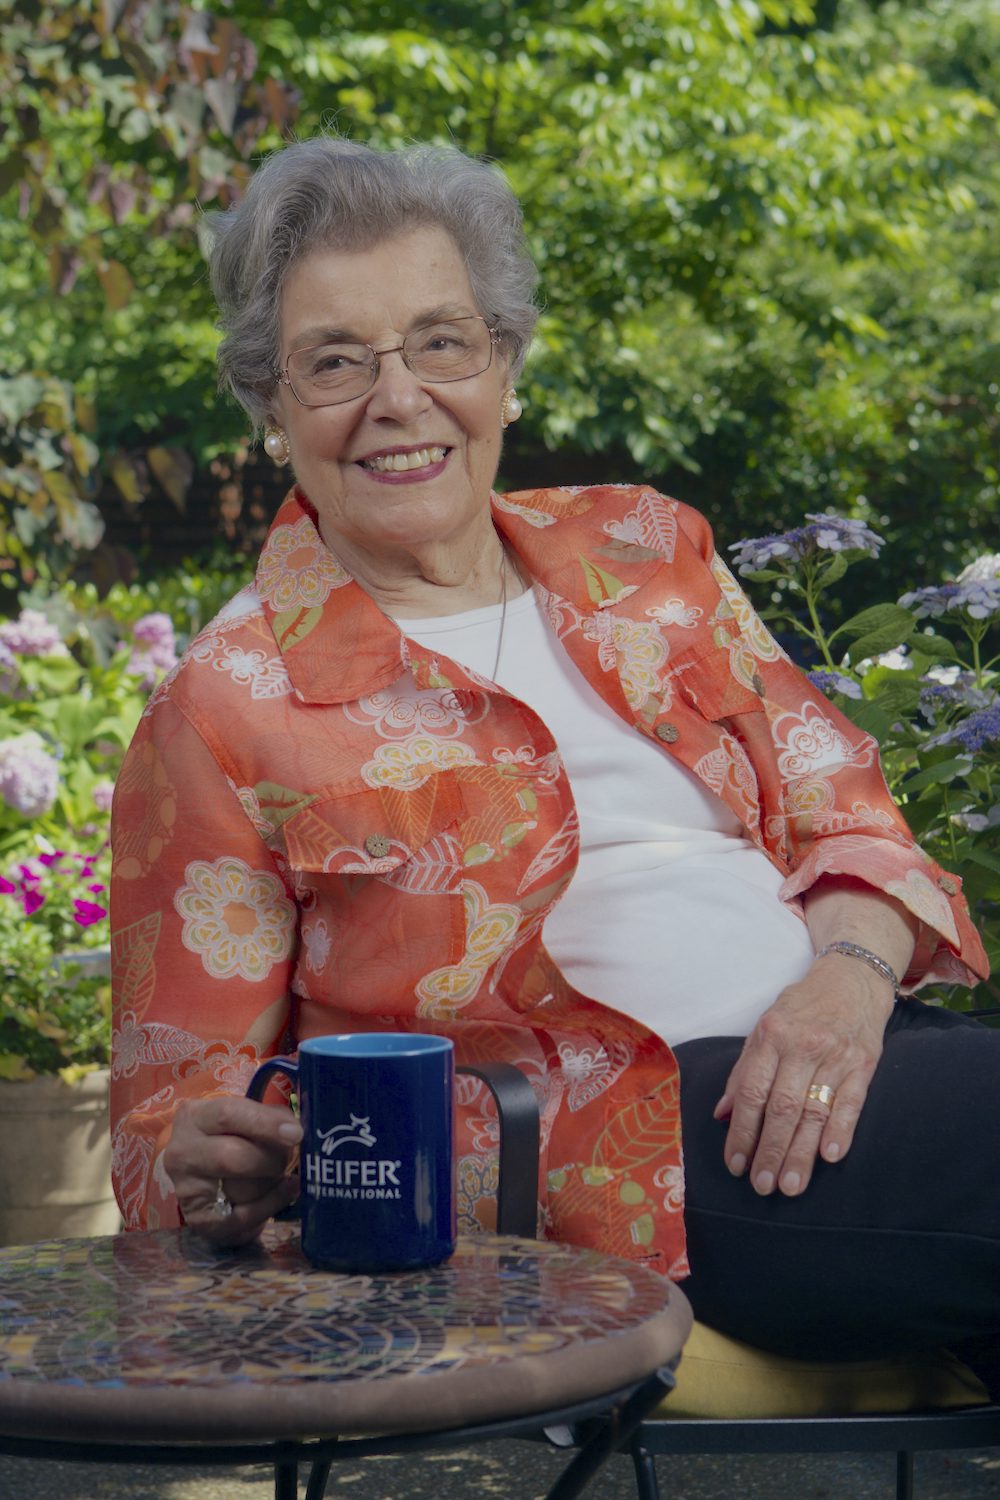 A smiling woman in her 70s sits in a chair holding a Heifer International coffee cup.